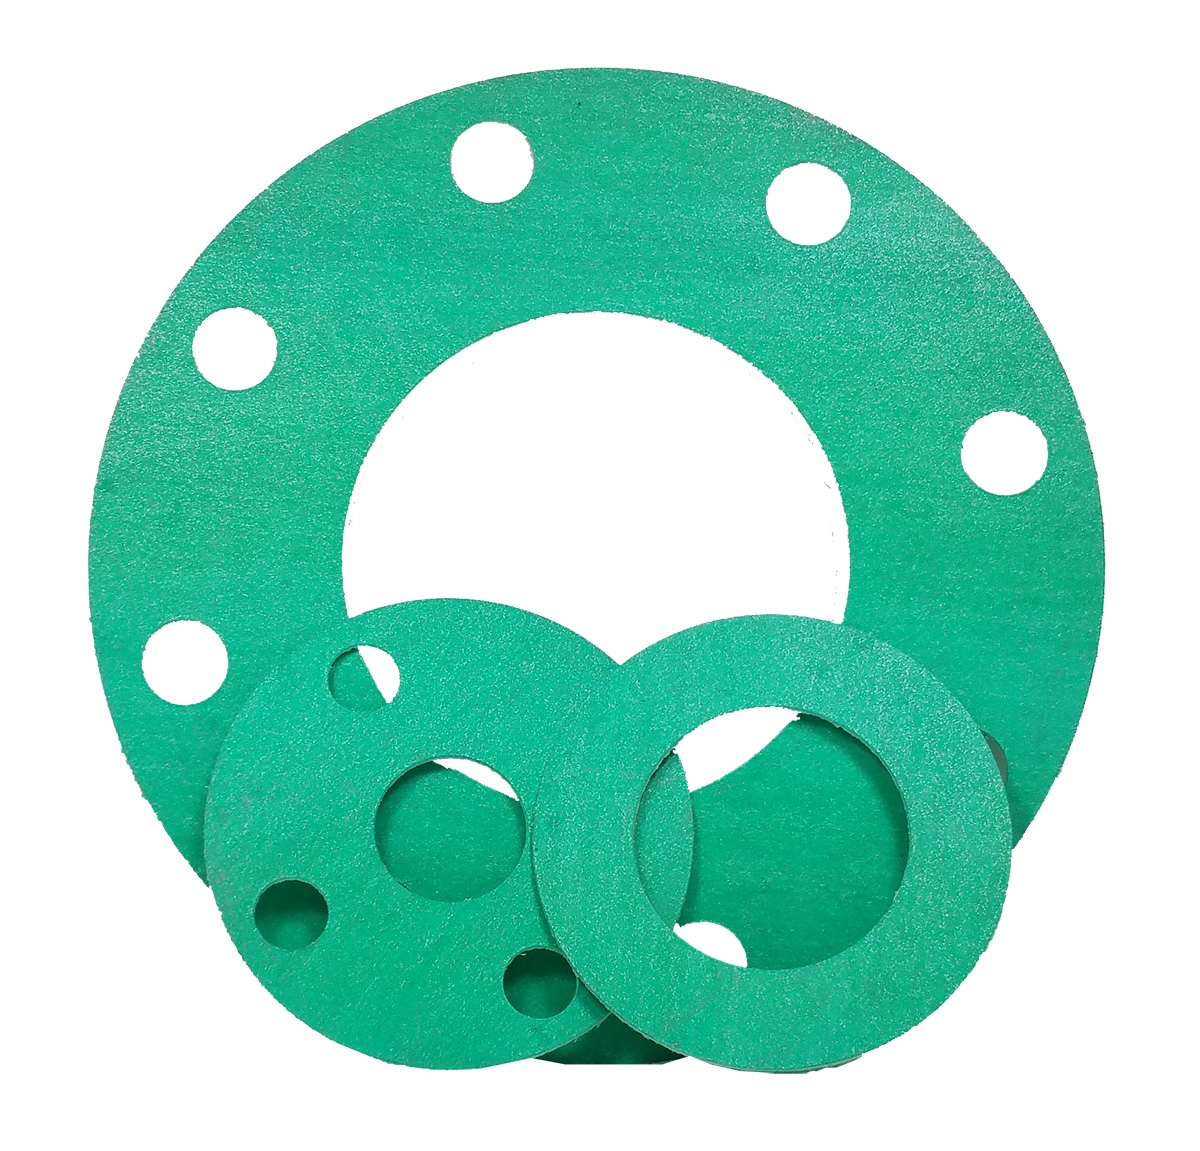 1-1/2 Pipe Size 1/8 Thick 1.90625 ID Supplied by Sur-Seal Full Face Gasket Sterling Seal CFF7001.1500.125.300X10 7001 Compressed Non-Asbestos 1-1/2 Pipe Size Aramid Fibers/Nitrile Rubber Pack of 10 1/8 Thick Pressure Class 300# 1.90625 ID